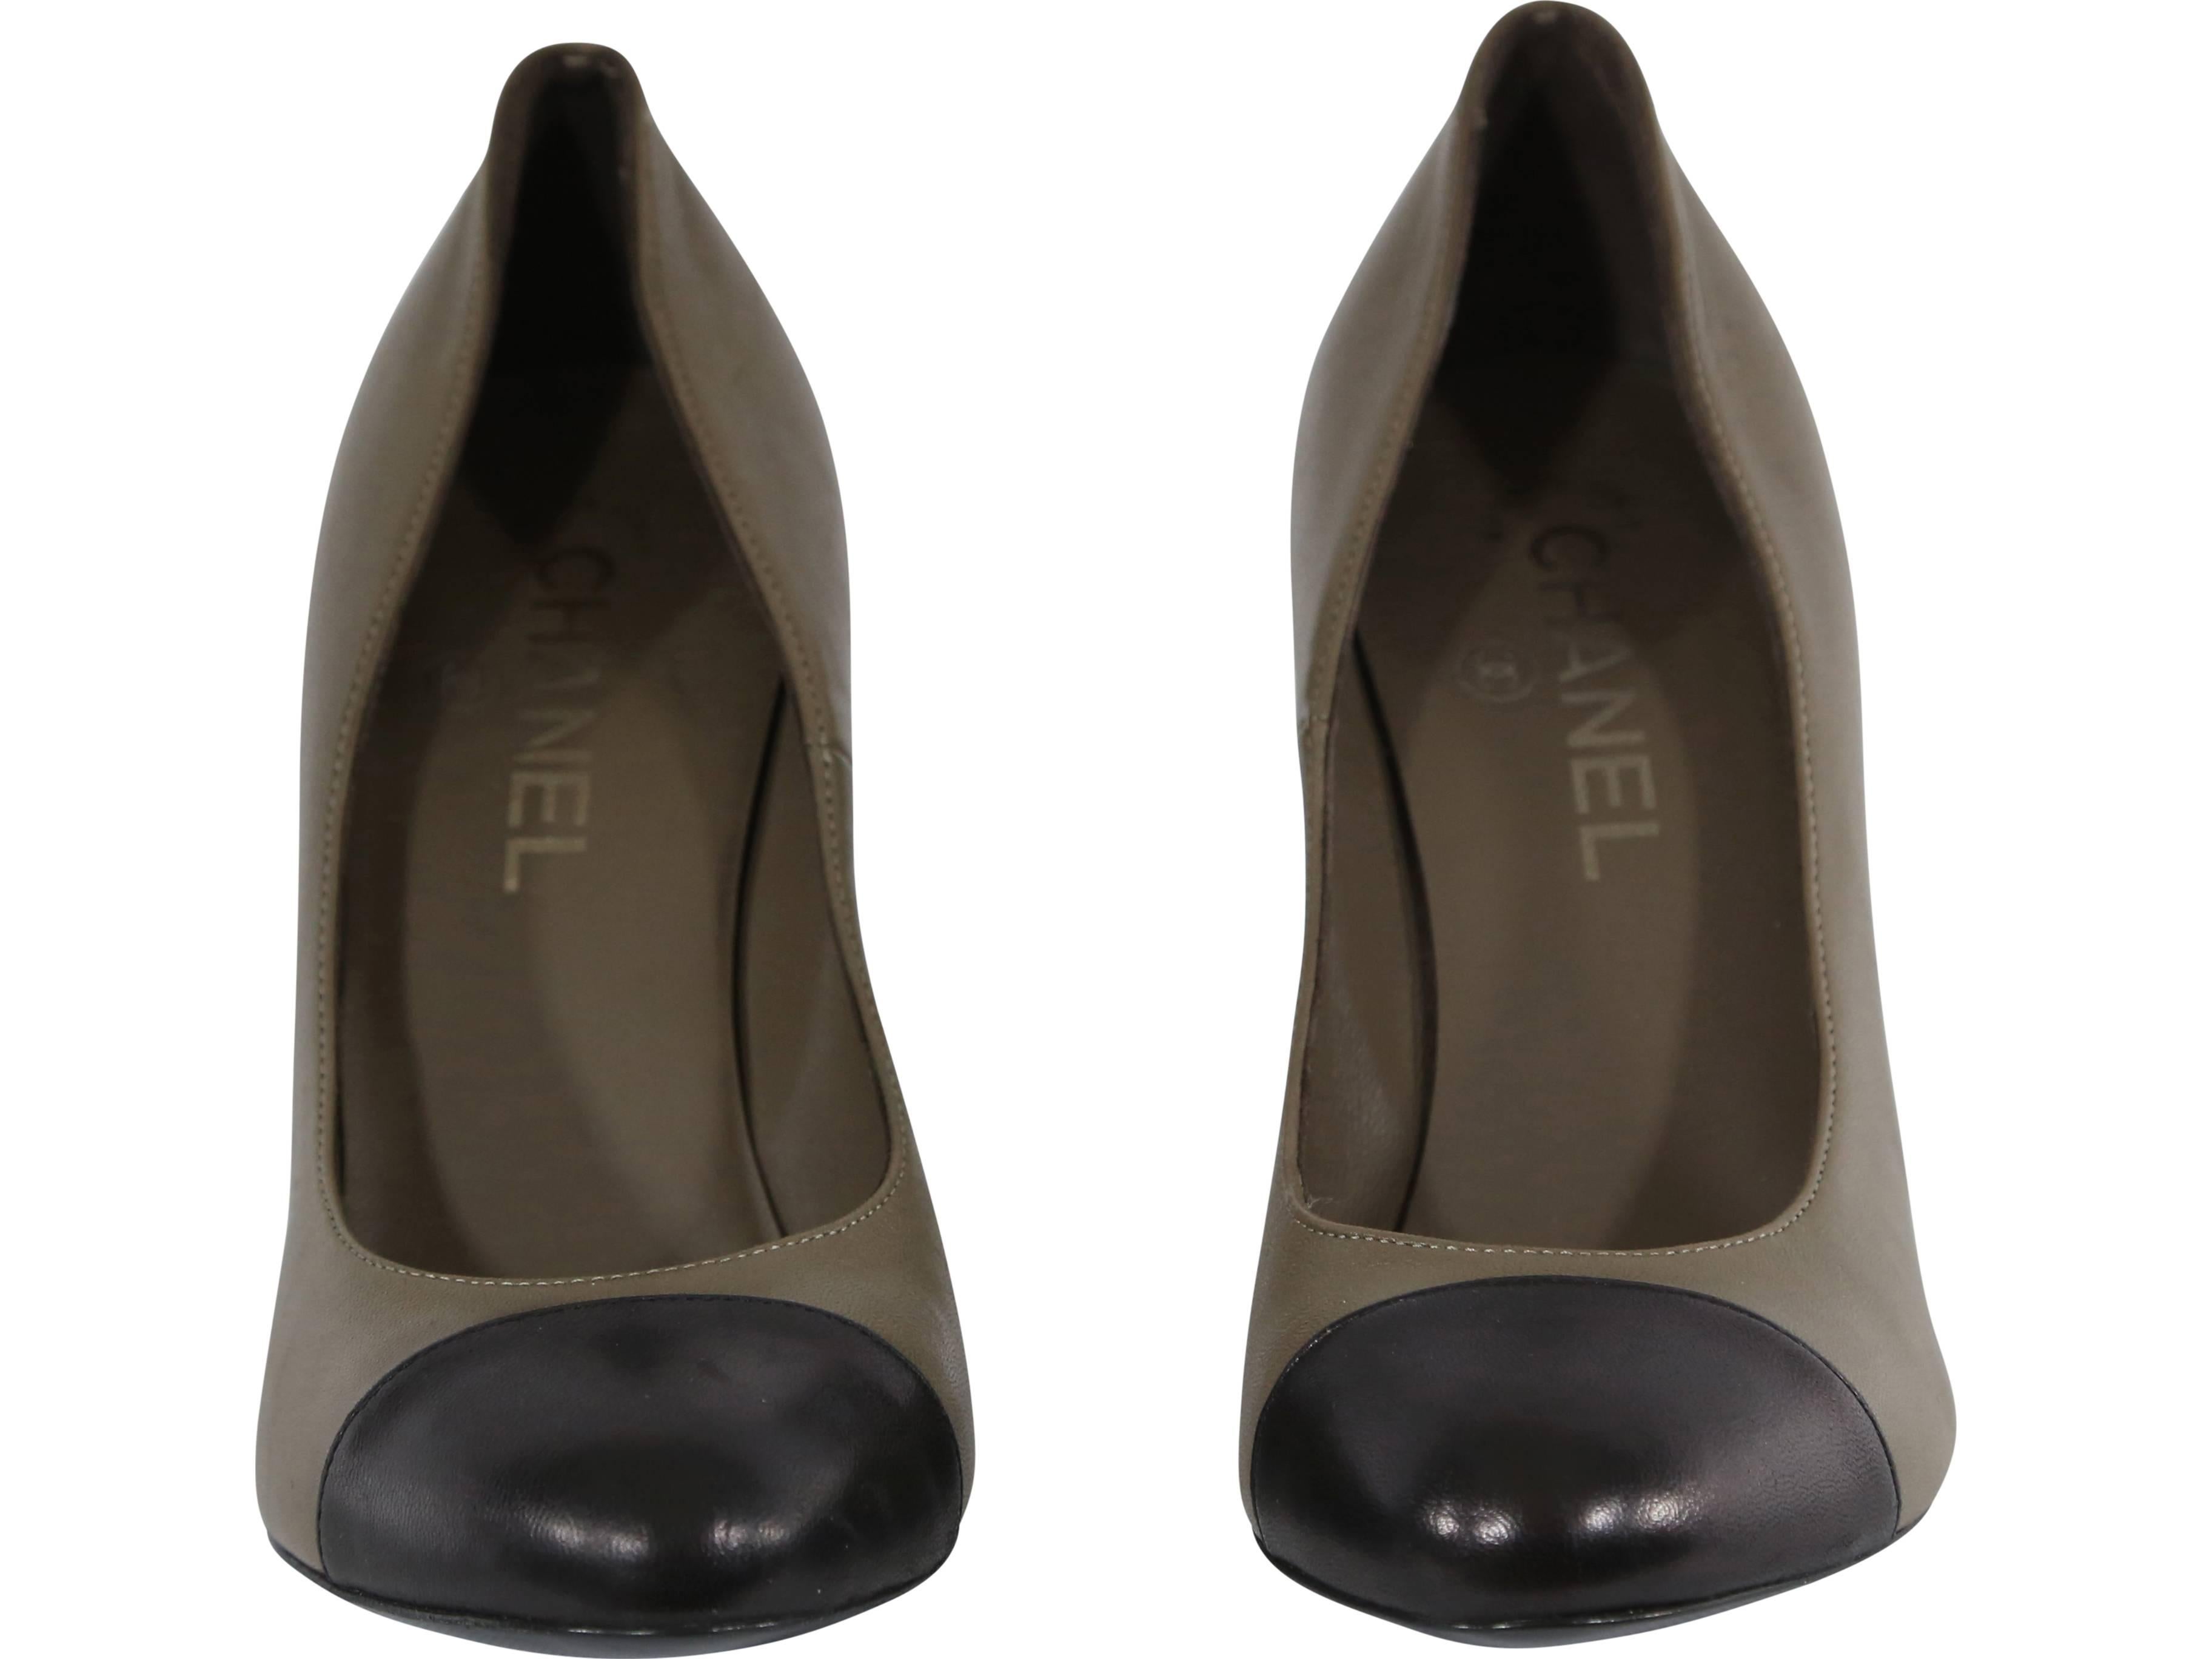 Chanel black and olive two tone pump with chunky heel. 